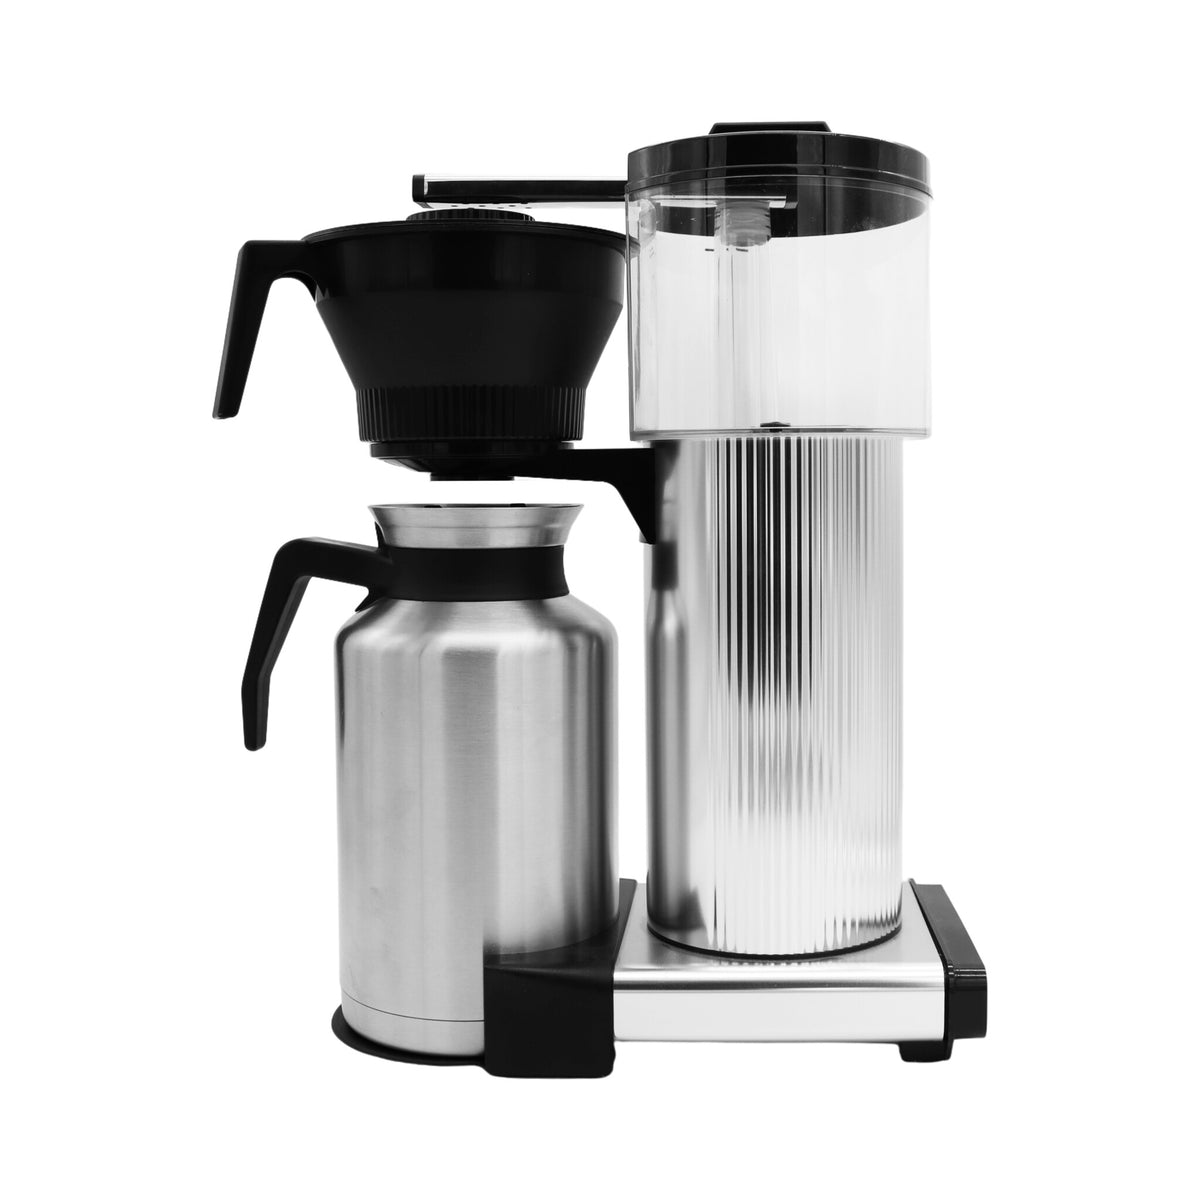 Moccamaster CDT Grand - 1.8 Litre Fully-auto Drip coffee maker in Black / Metallic